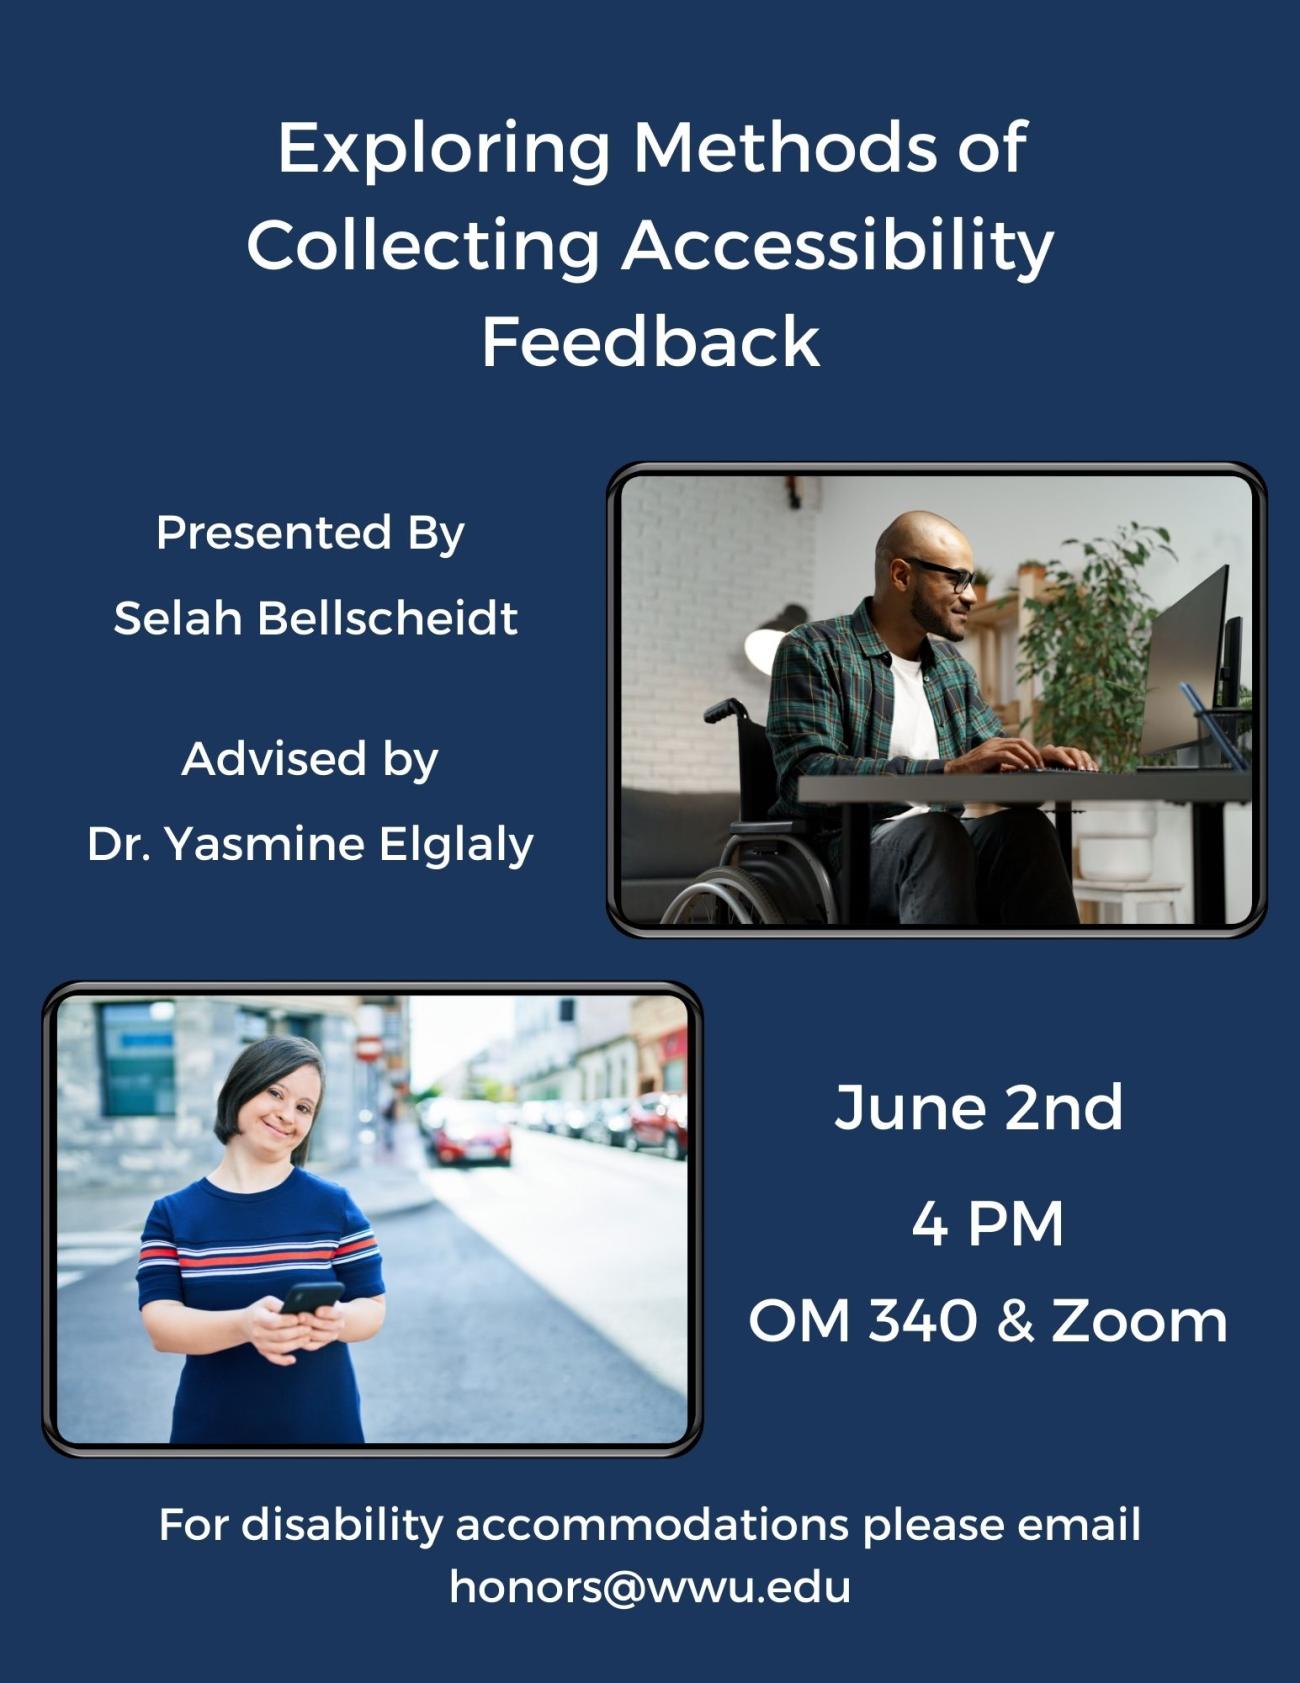 Dark blue background containing two images: a male wheelchair user looking at a computer and a woman with Down syndrome holding a phone. Text reads "Exploring Methods of Collecting Accessibility Feedback. Presented by Selah Bellscheidt. Advised by Dr. Yasmine Elglaly. June 2nd at 4pm in Old Main 340 and on Zoom. For disability accommodations, please email honors@wwu.edu."